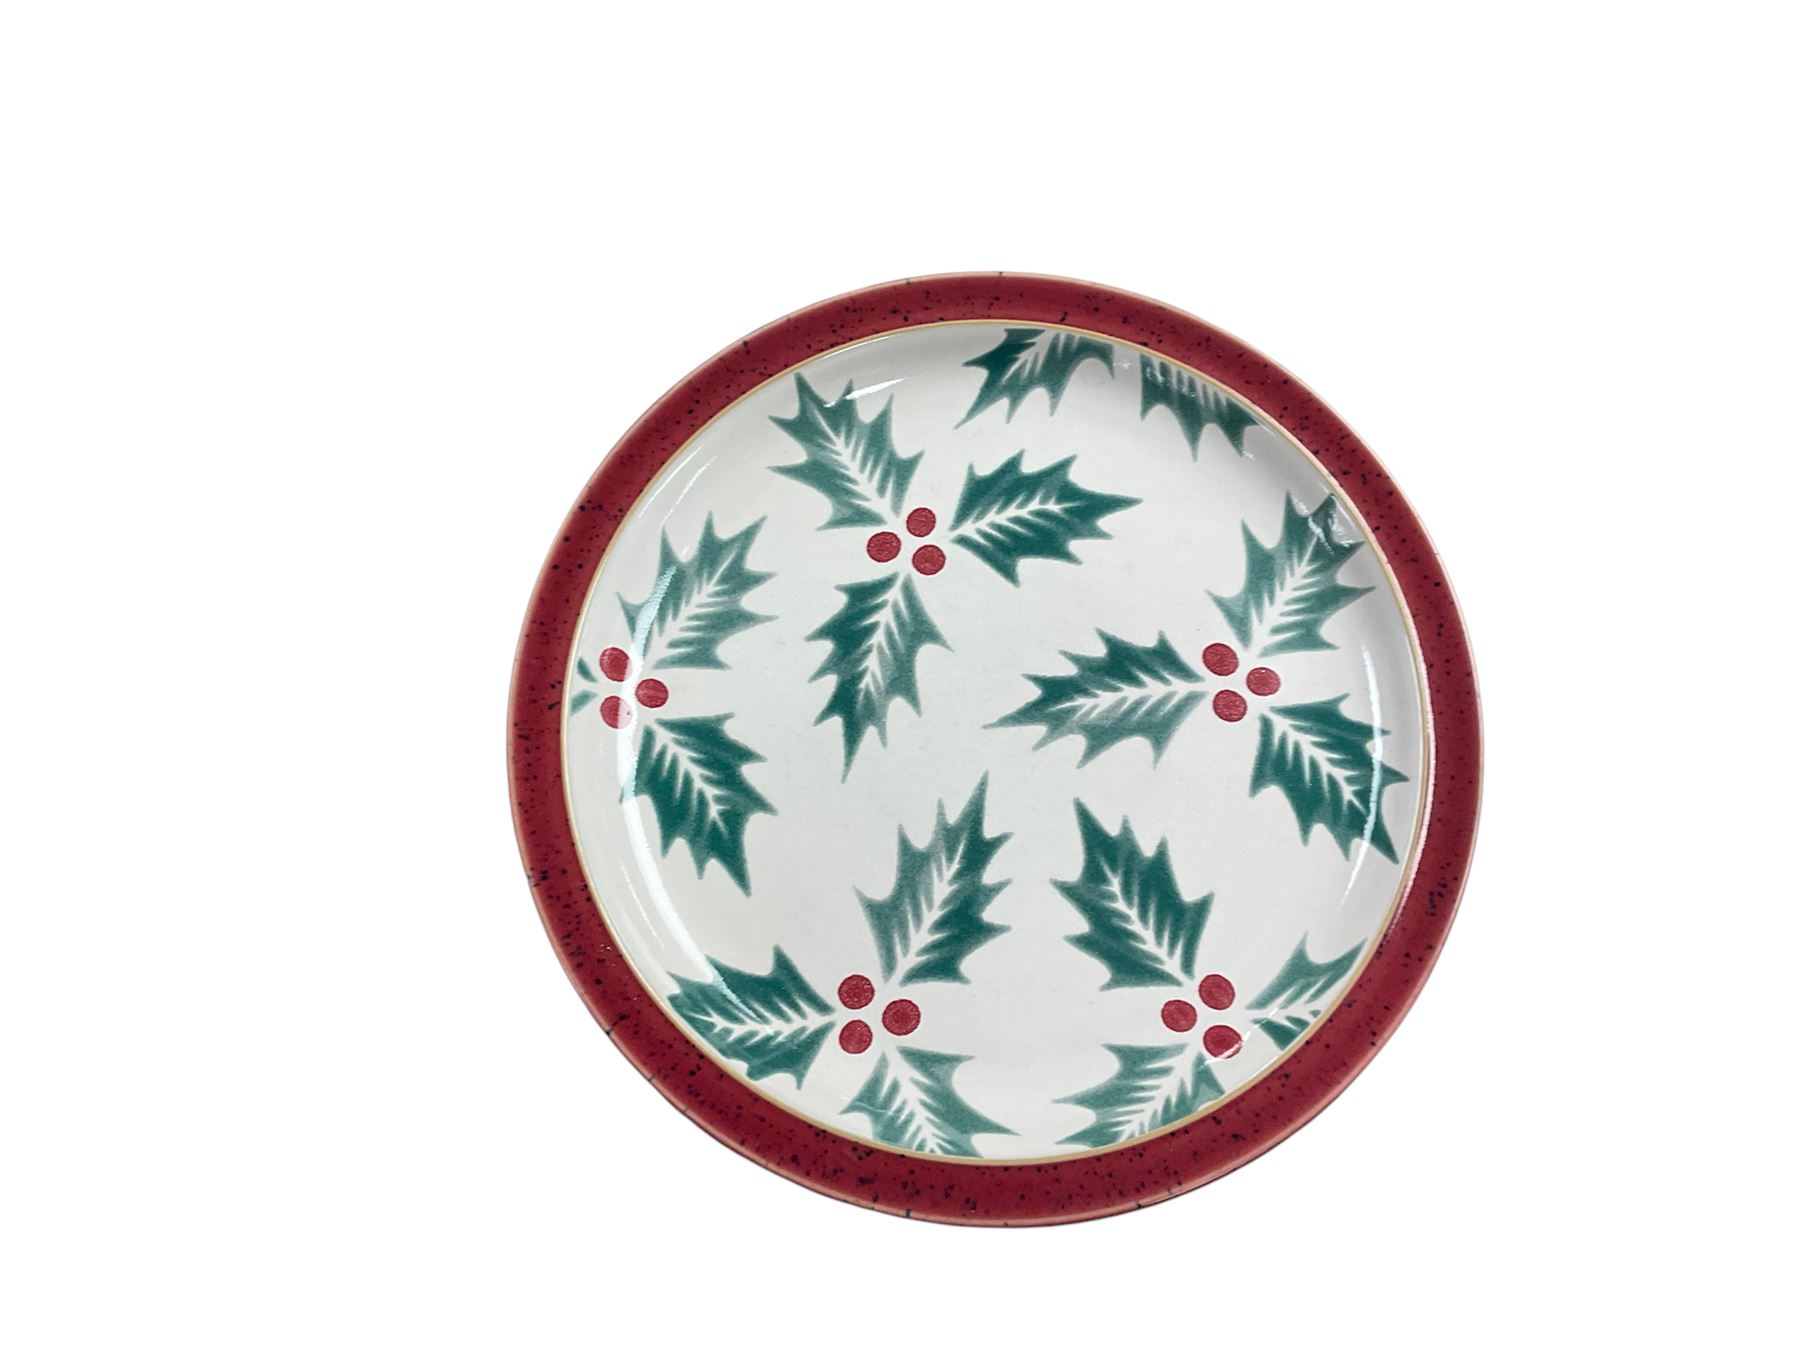 Denby Holly pattern Christmas ceramics - Image 3 of 4